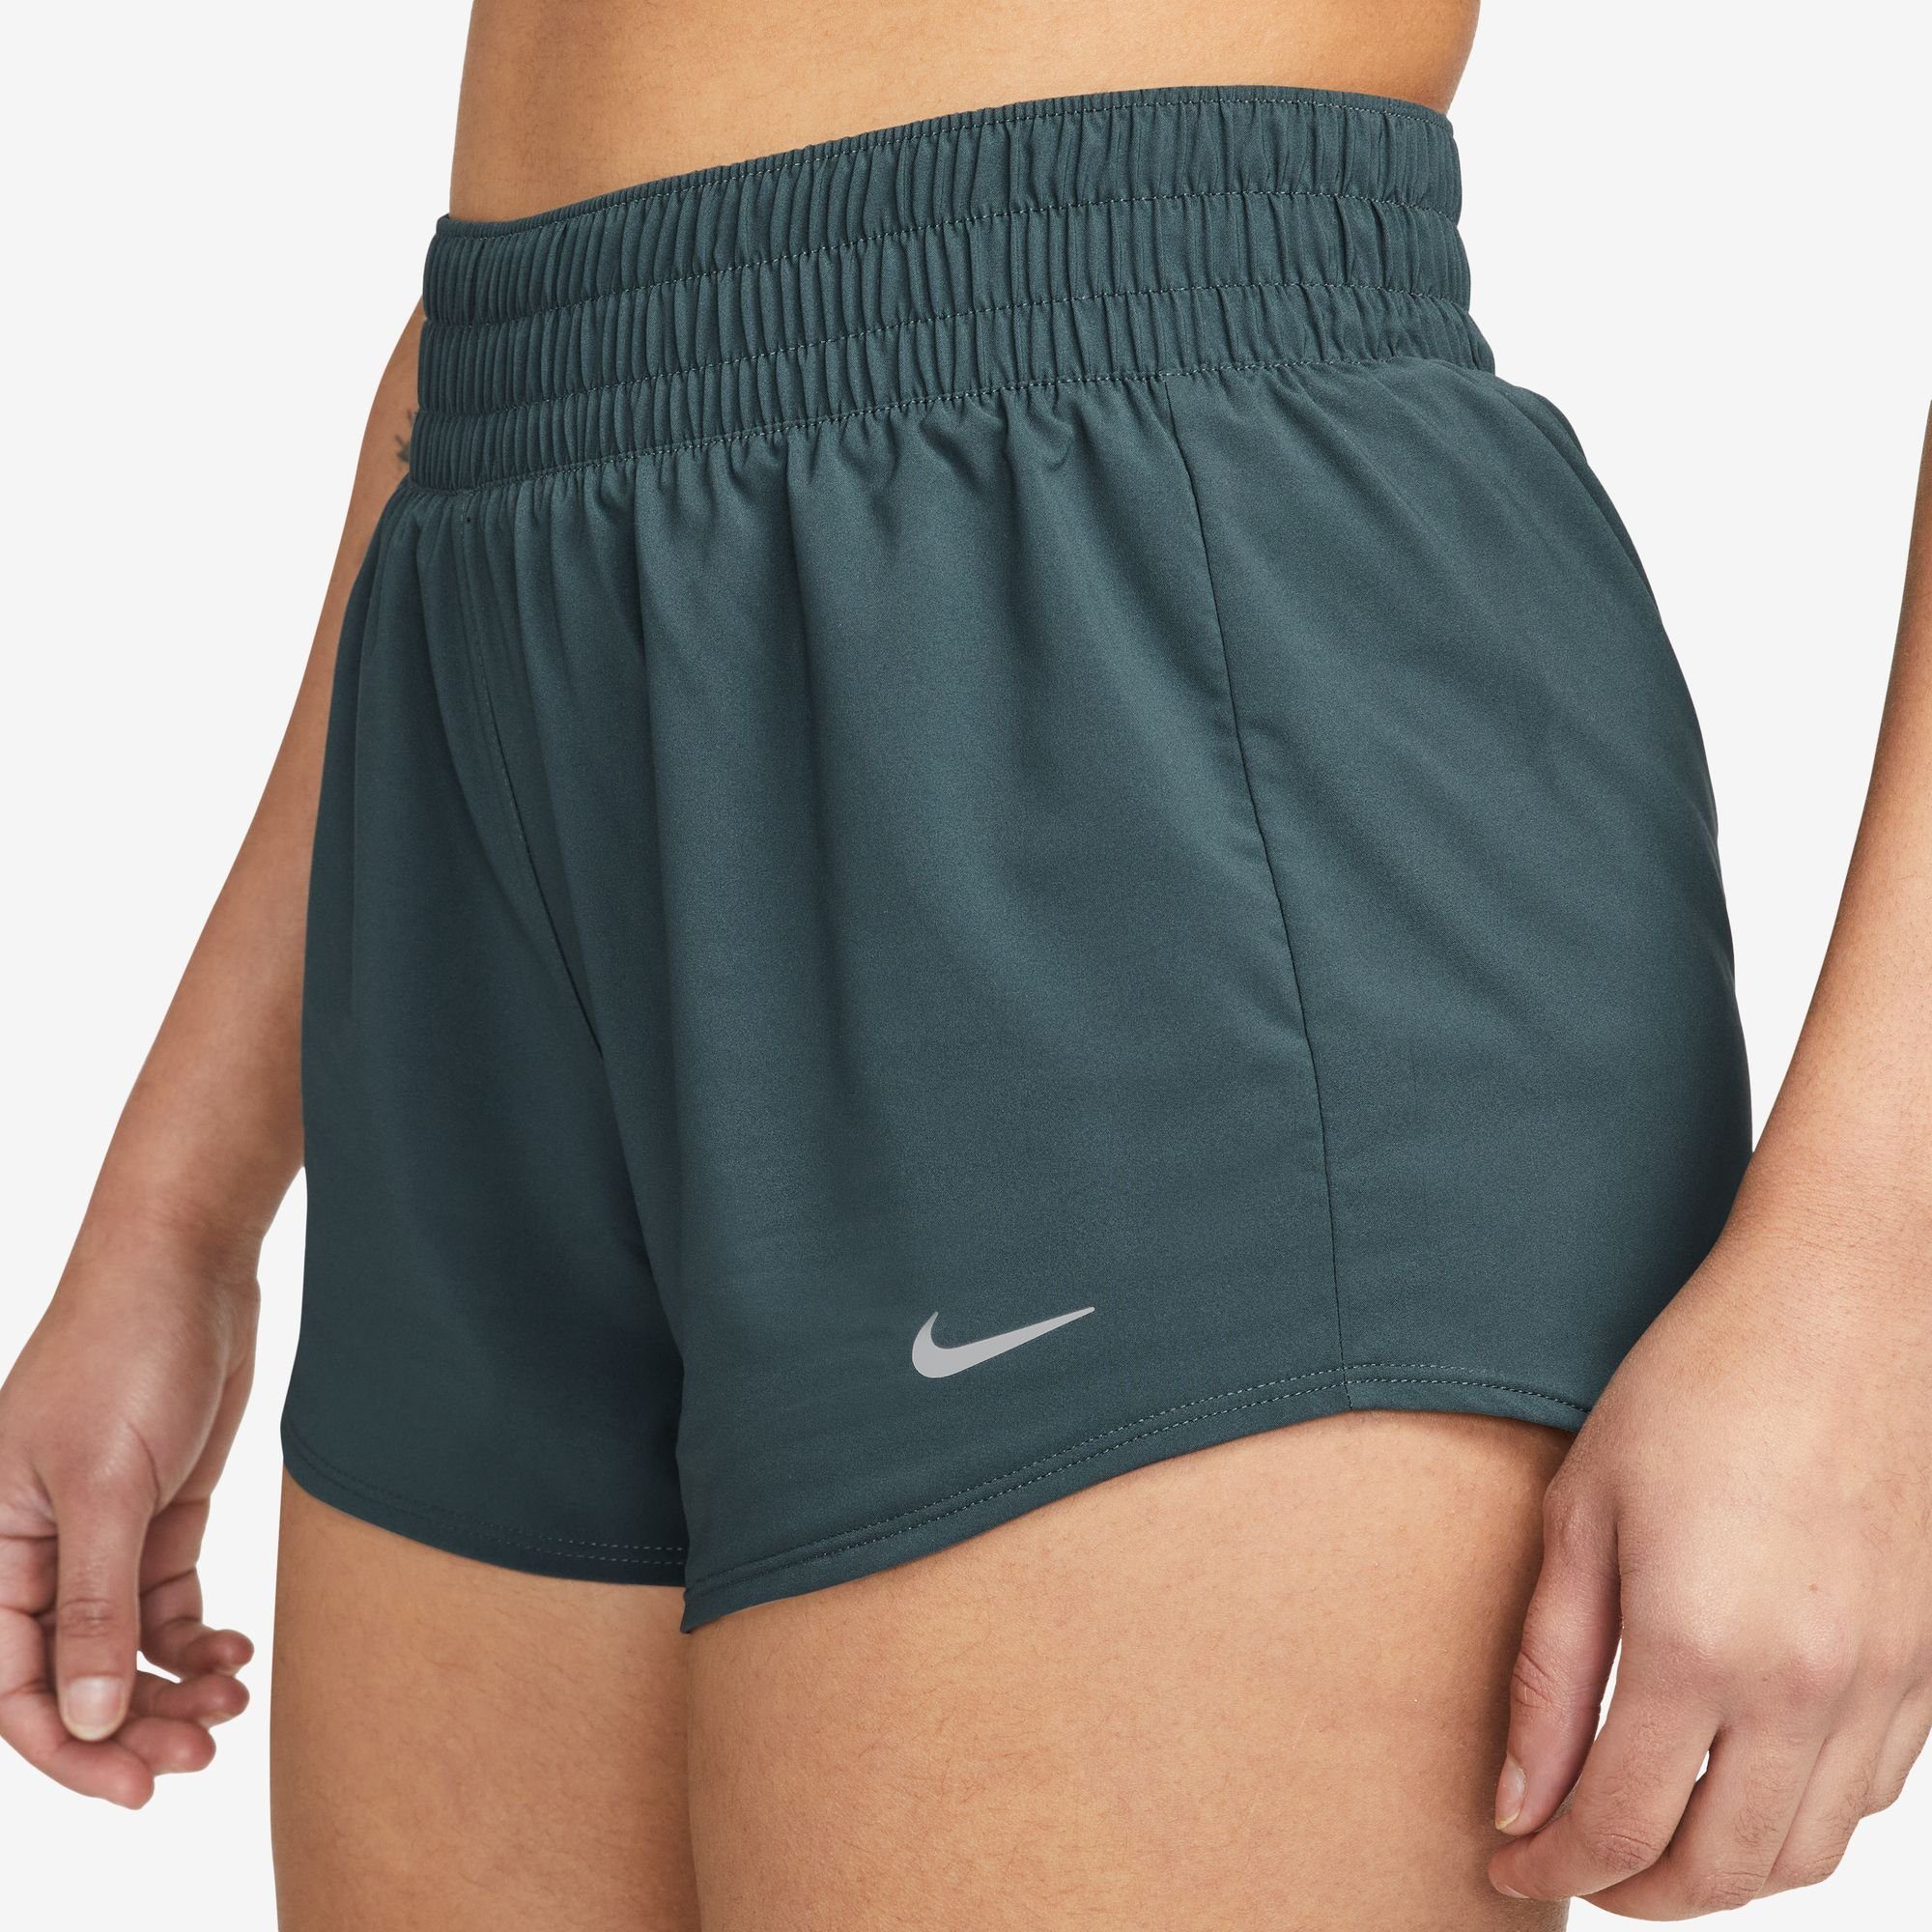 JUNGLE/REFLECTIVE DRI-FIT WOMEN'S ONE MID-RISE DEEP BRIEF-LINED Nike Trainingsshorts SHORTS SILV